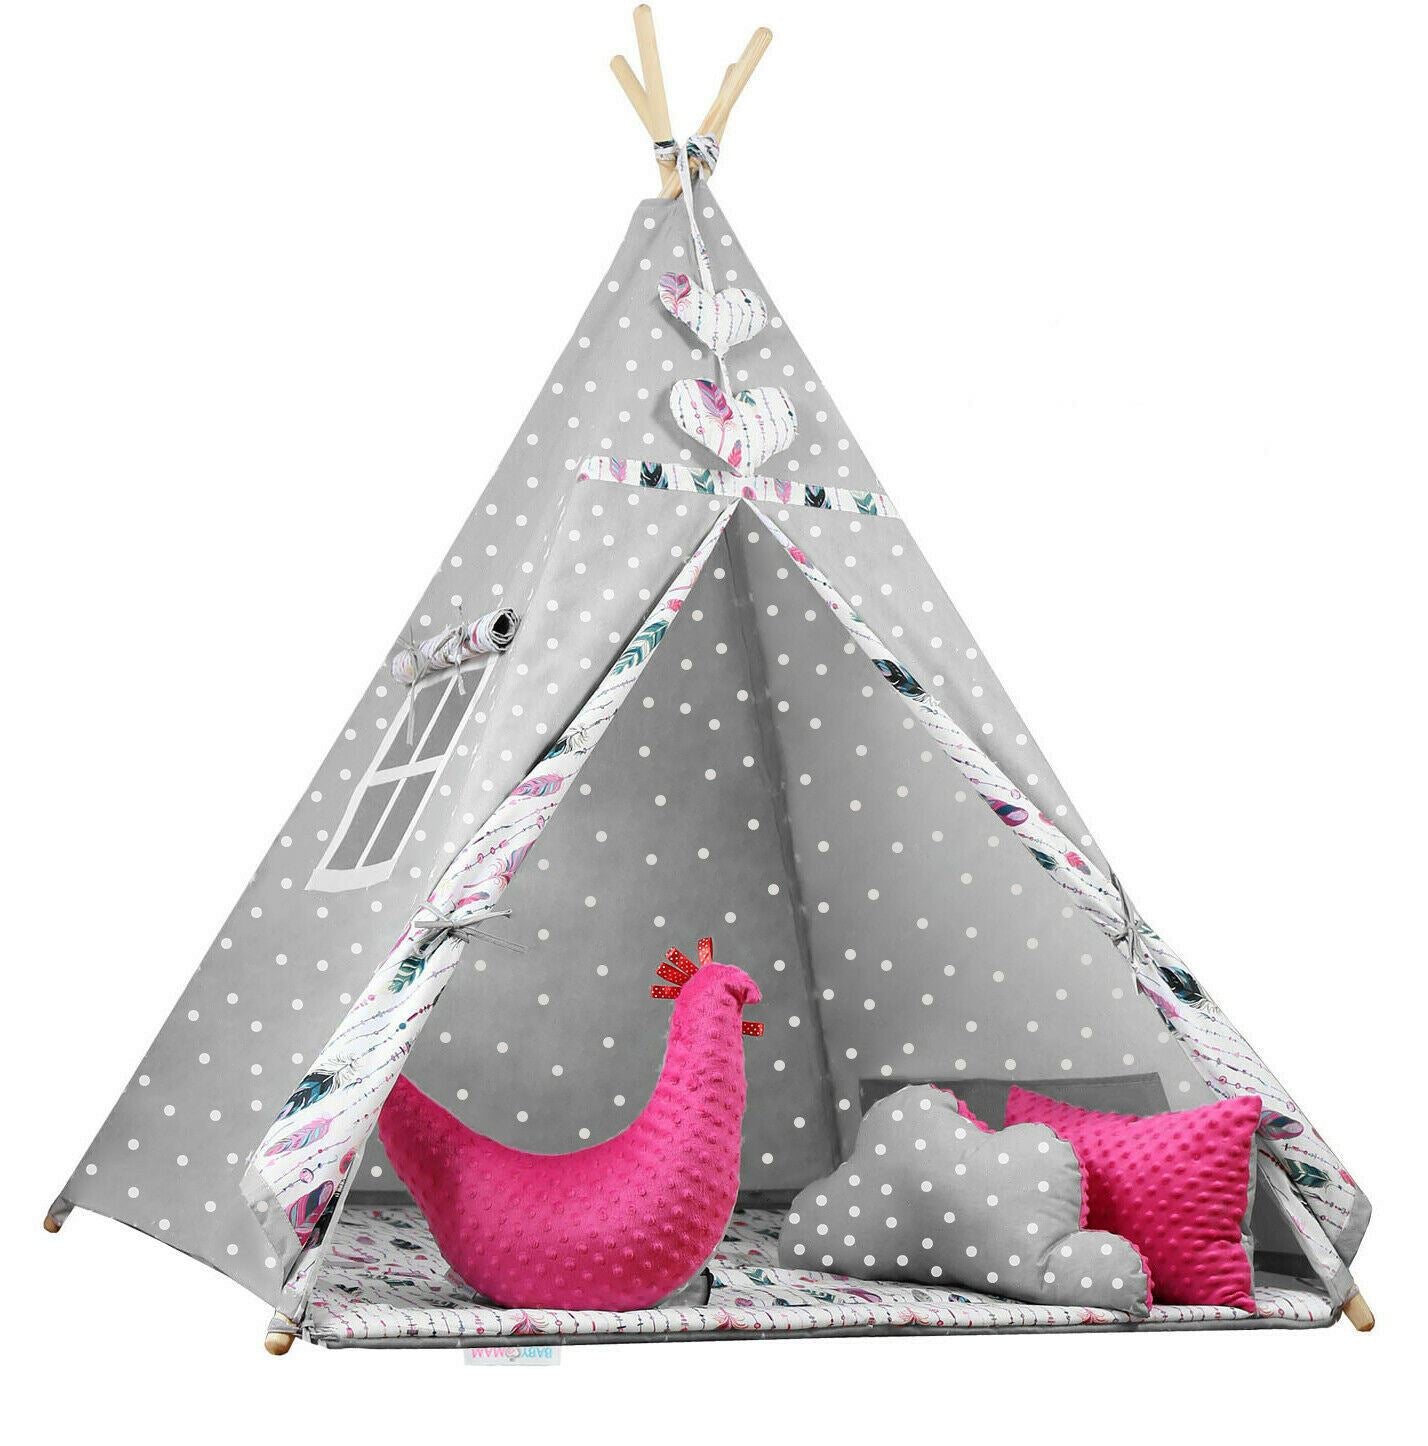 Teepee Wigwam Indoor Outdoor Kids Playhouse Tent With Three Cushions Indian Dots